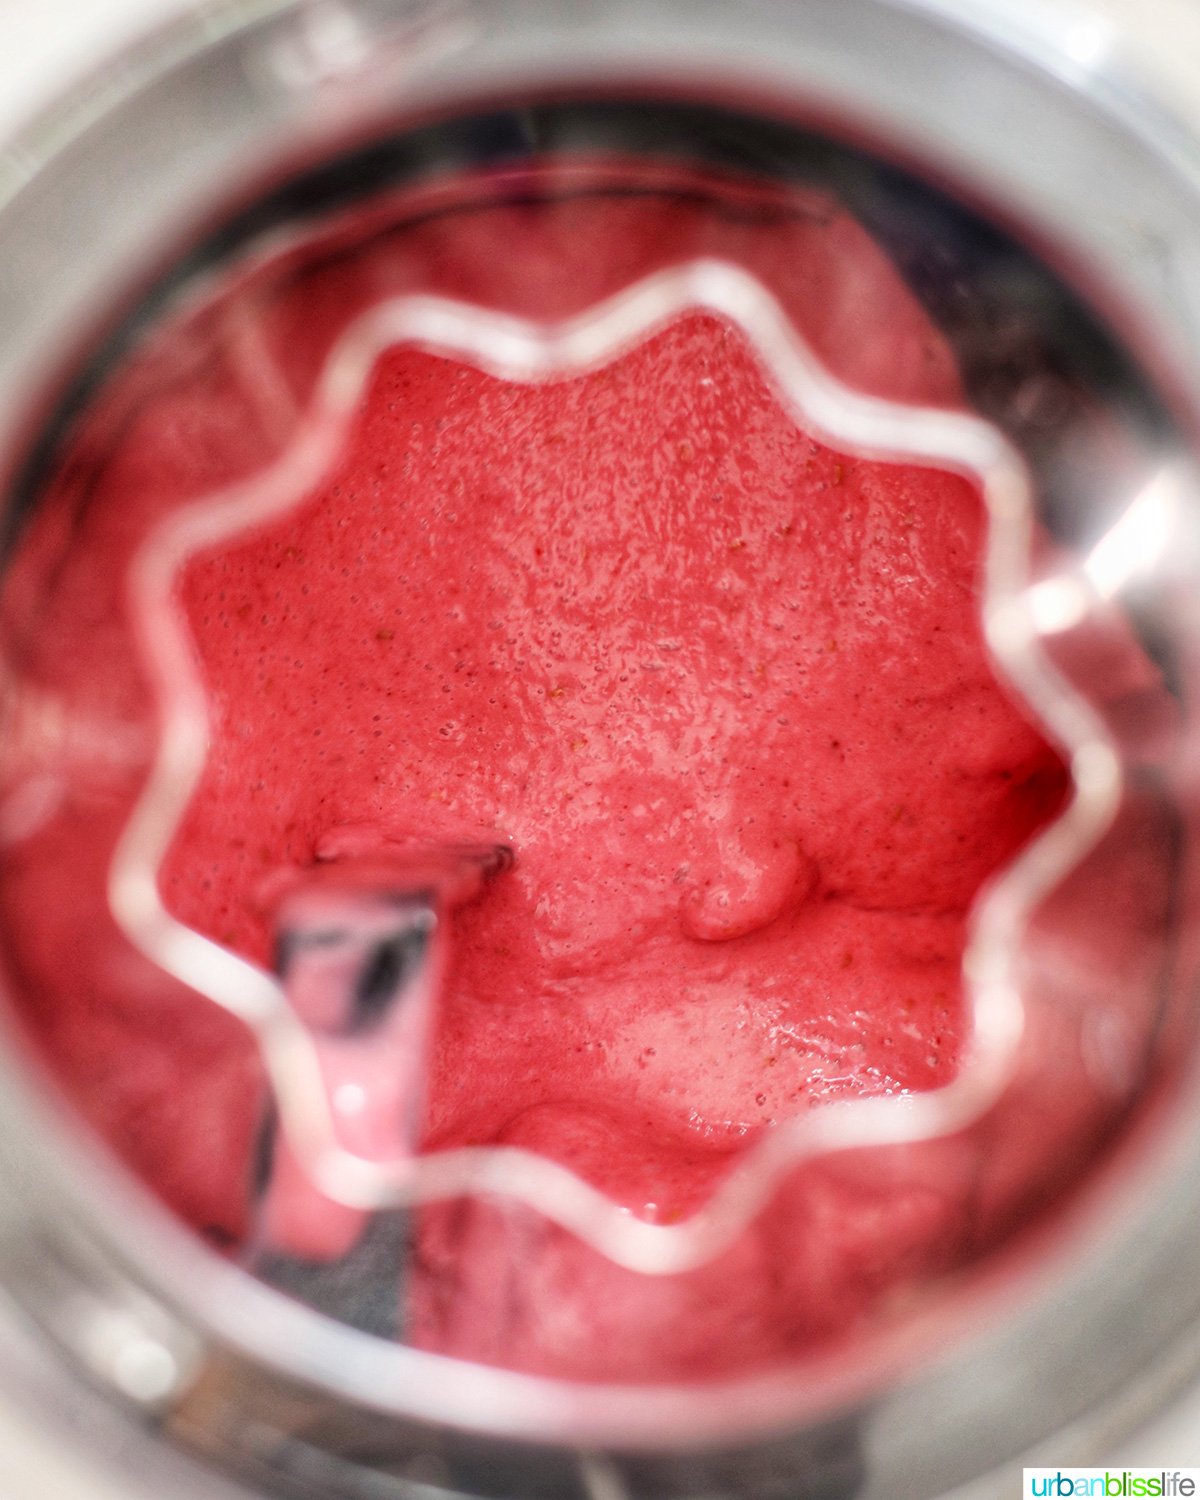 ice cream maker filled with liquid raspberry sherbet mixing into an ice cream..